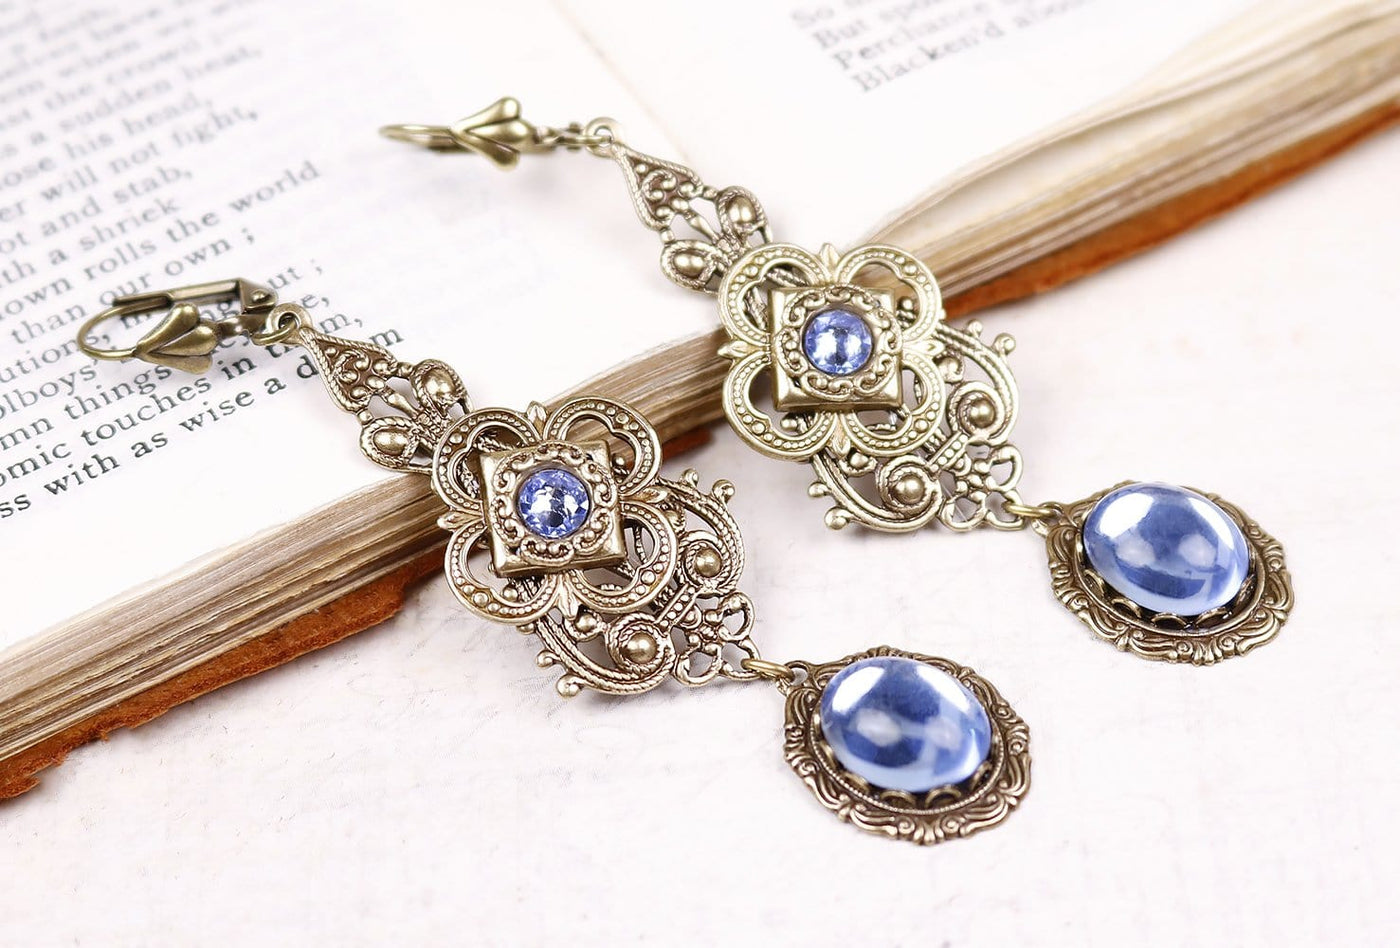 Avalon Earrings in Light Sapphire and Antiqued Brass by Rabbitwood & Reason